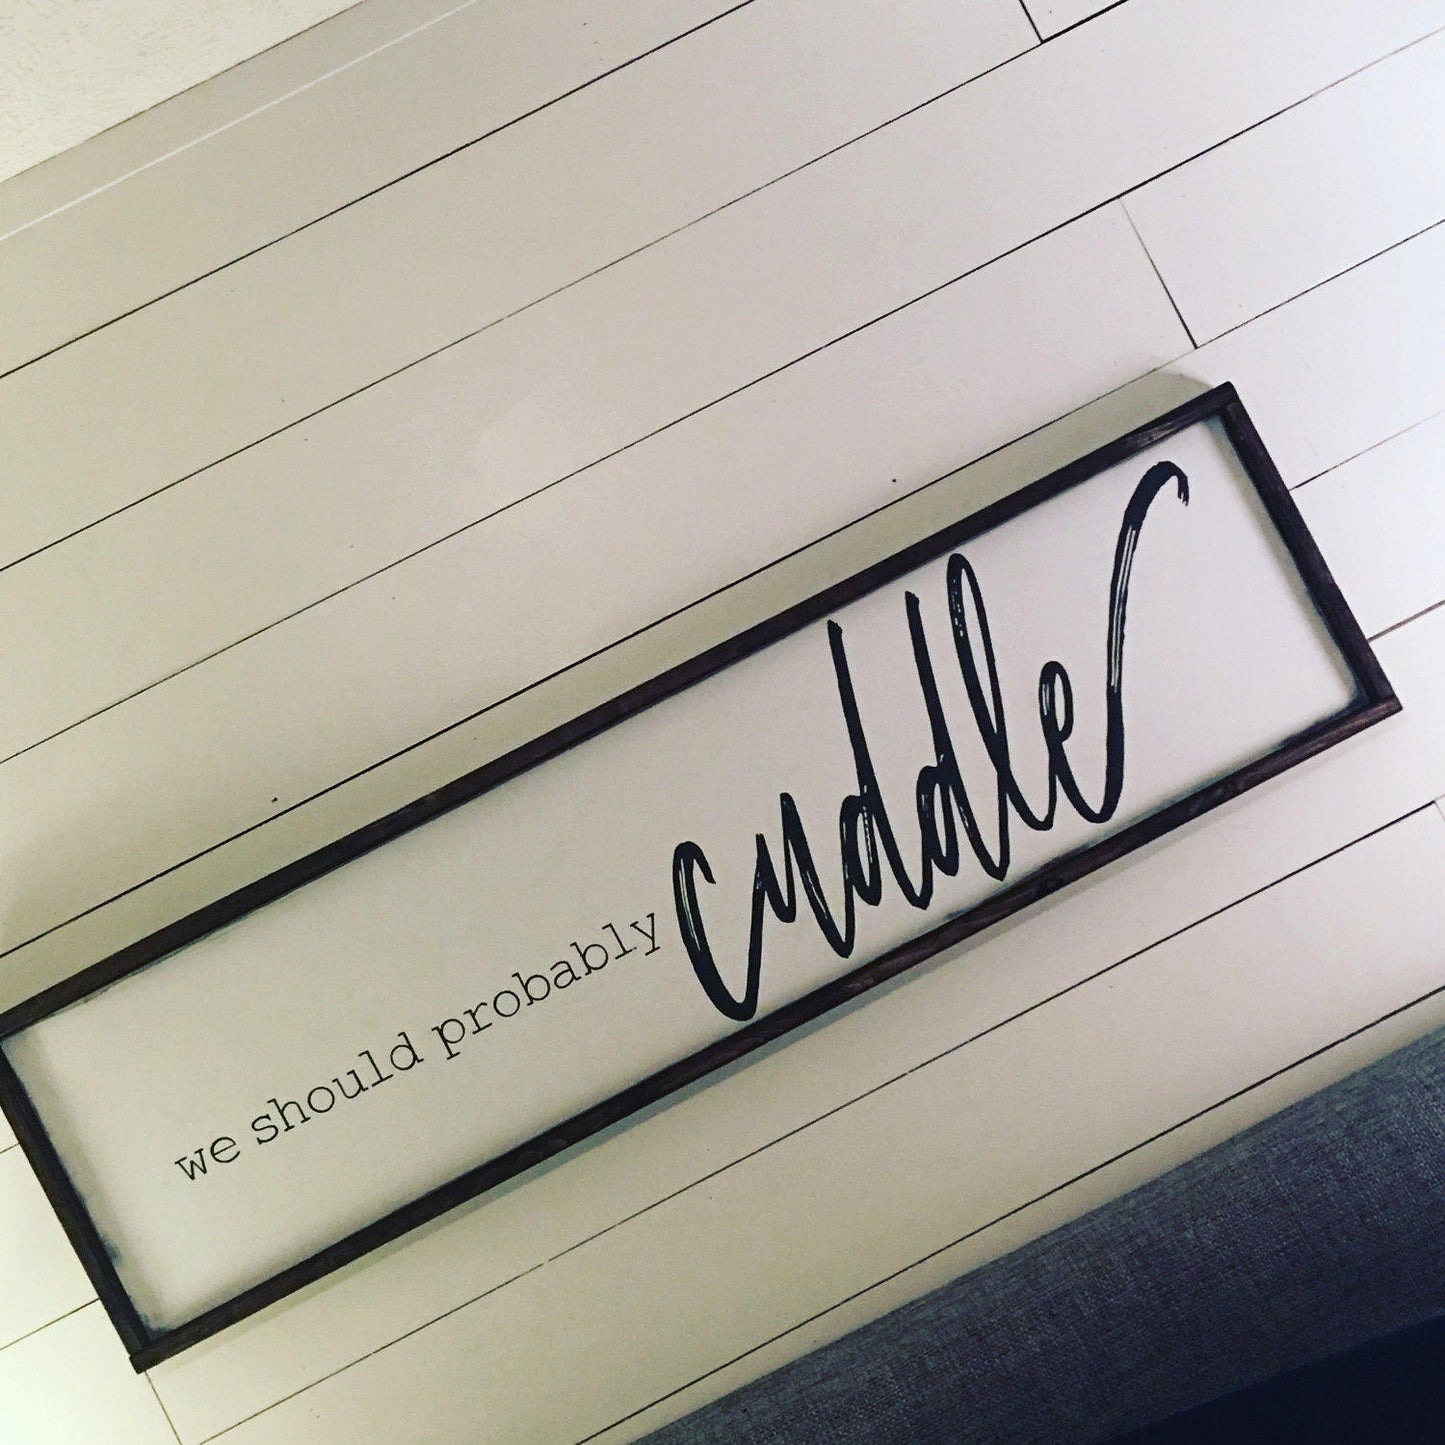 we should probably cuddle. above the bed sign [FREE SHIPPING!]